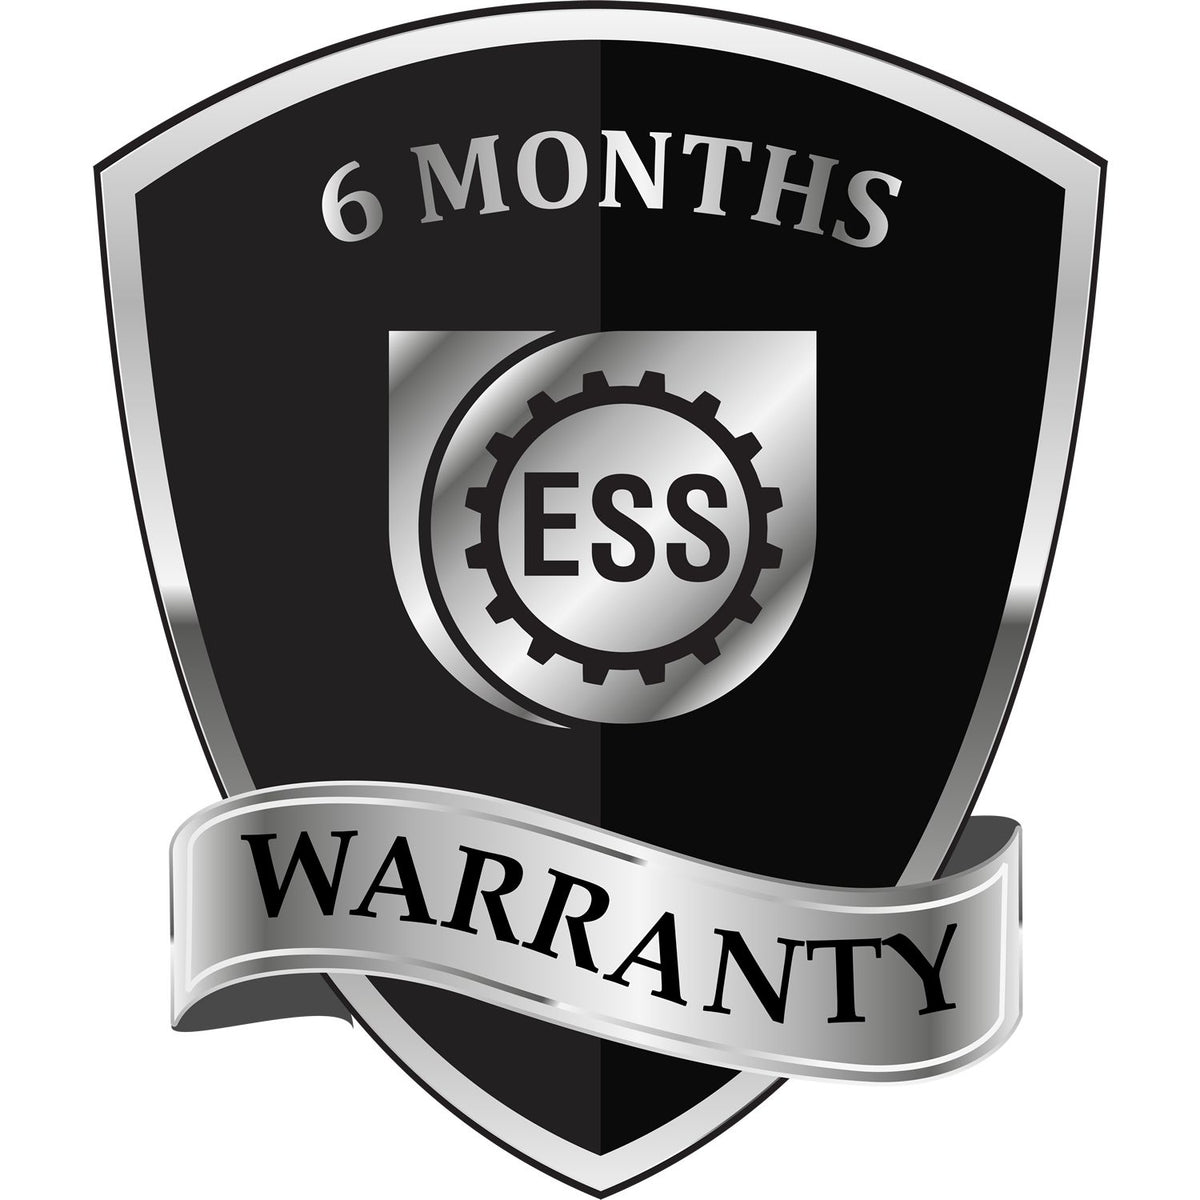 A badge or emblem showing a warranty icon for the New Hampshire Professional Engineer Seal Stamp